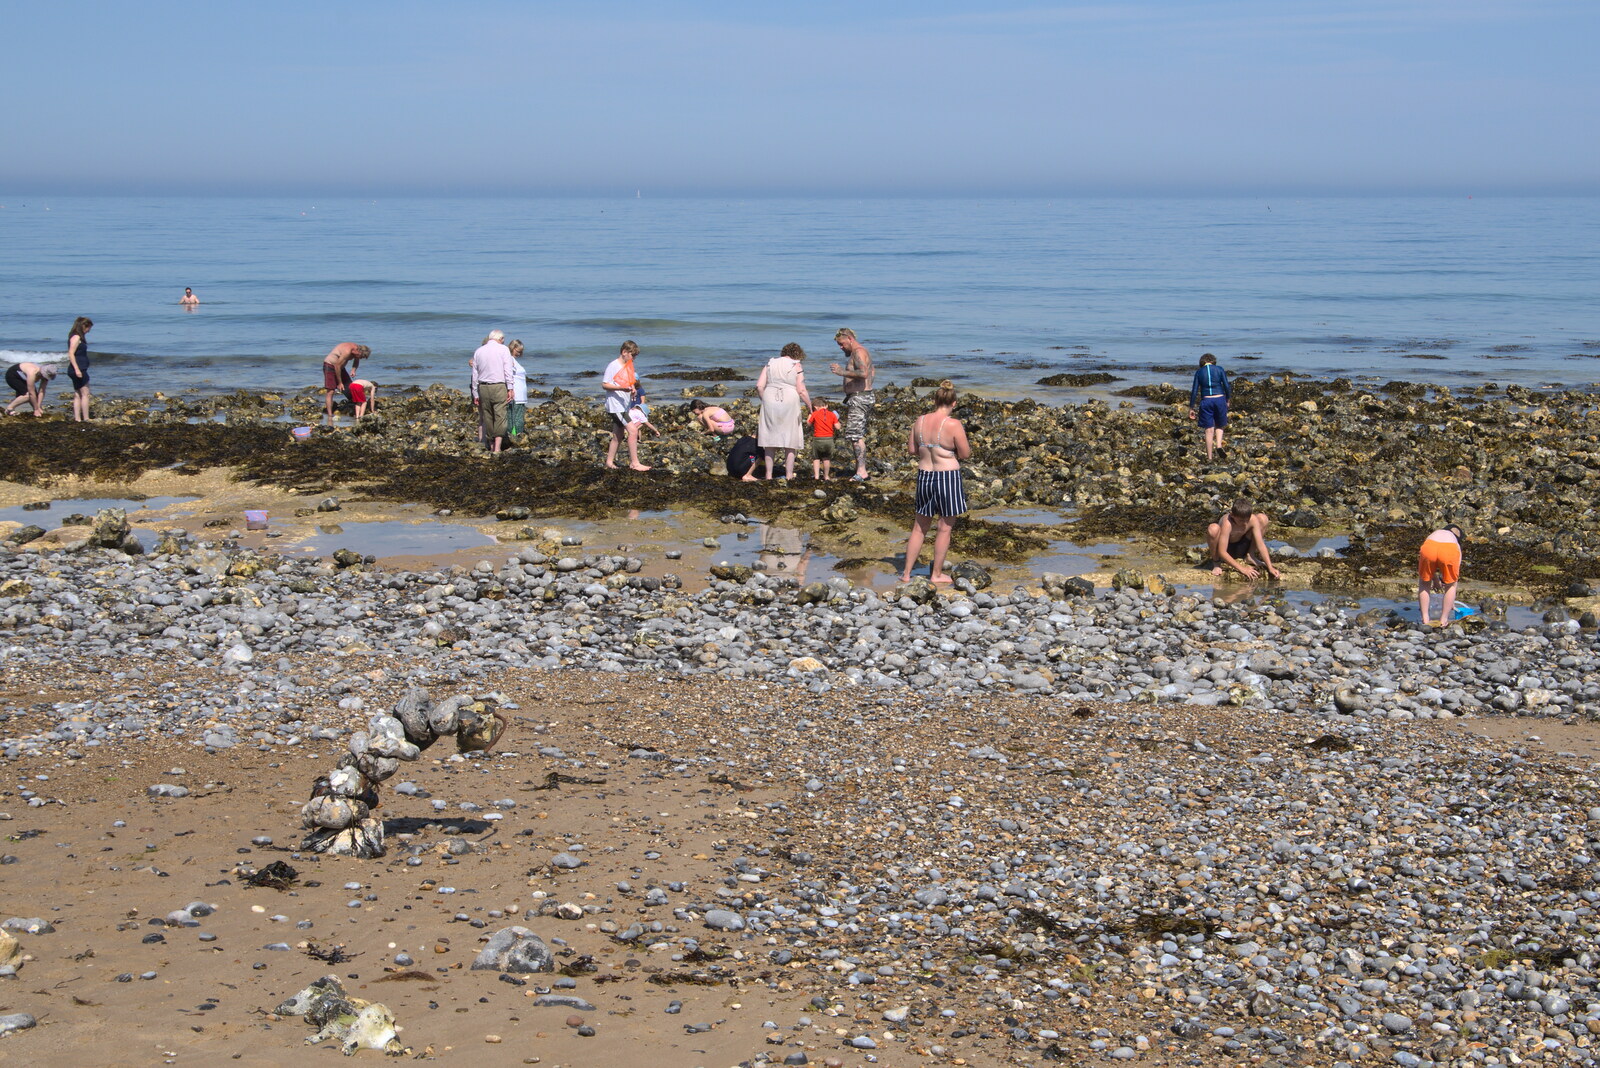 Fred explores rock pools at West Runton from Camping at Forest Park, Cromer, Norfolk - 12th August 2022